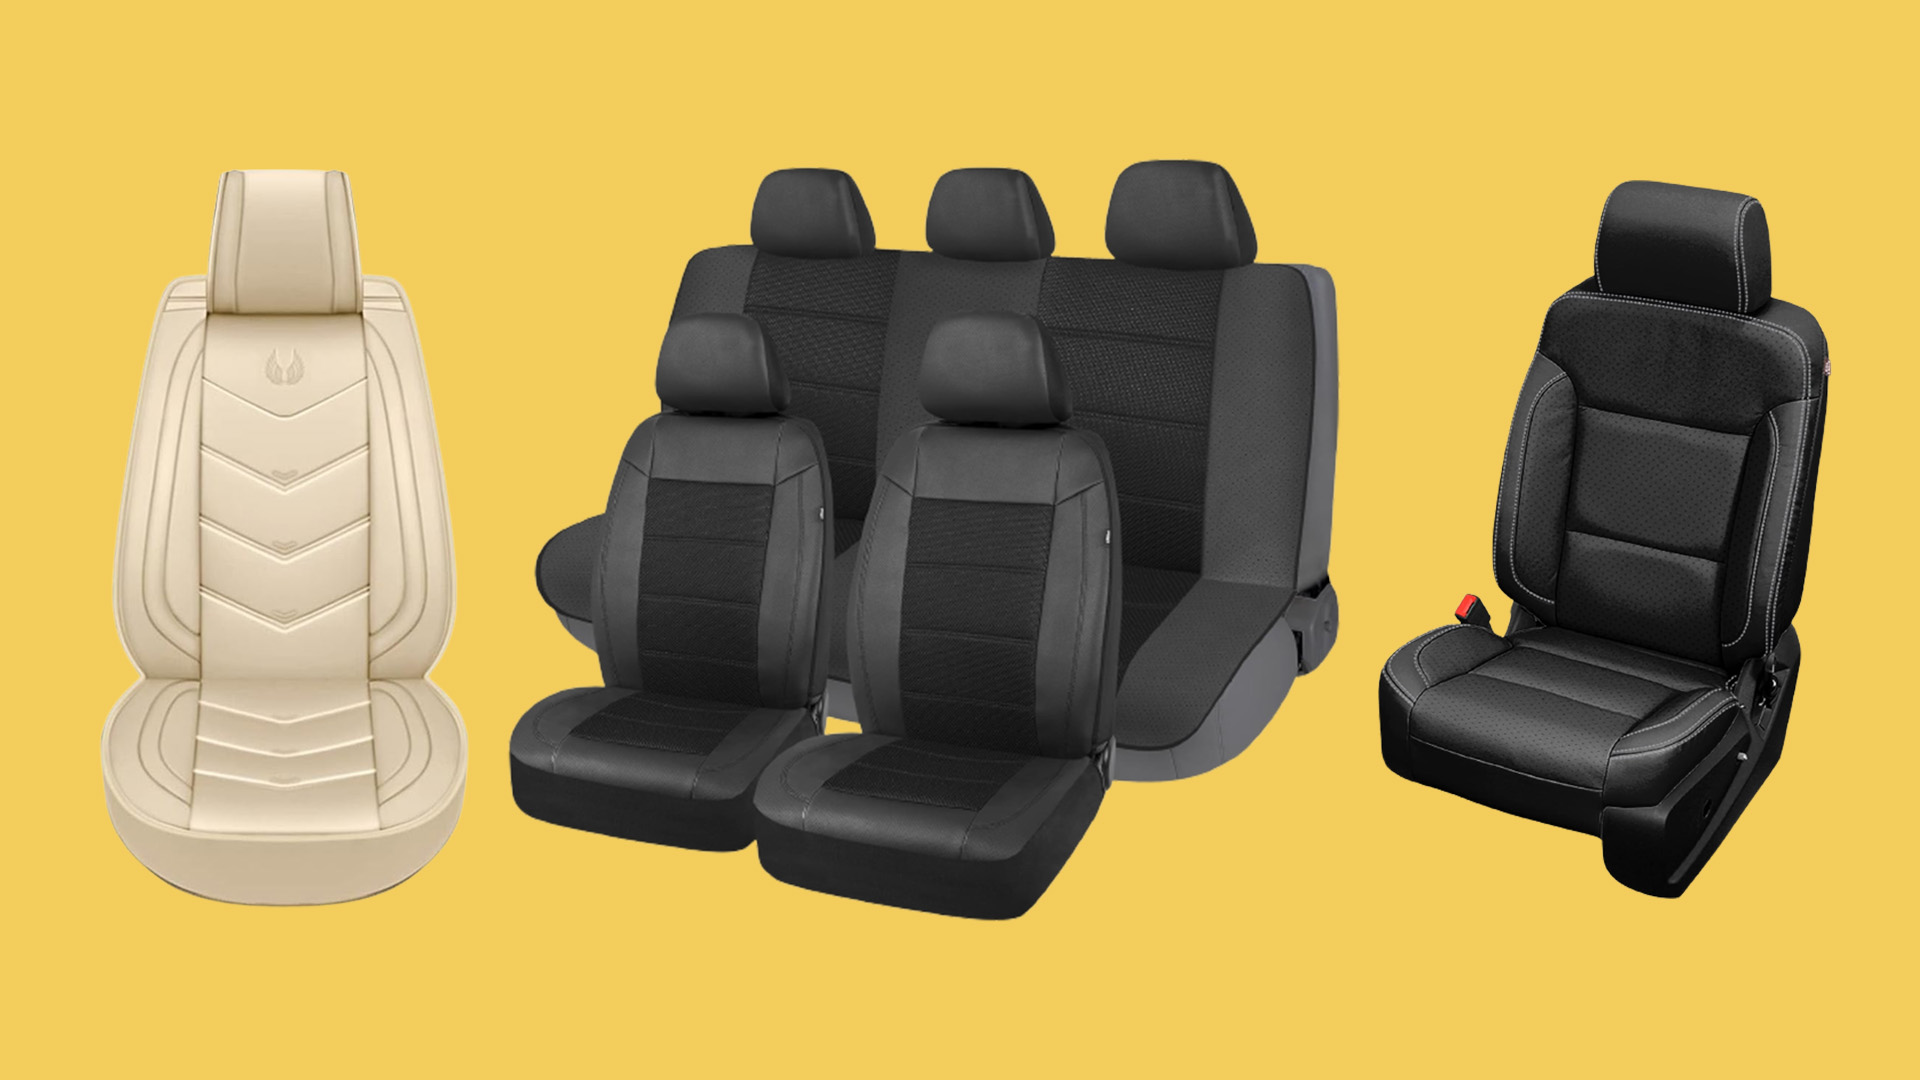 https://www.thedrive.com/uploads/2023/11/02/THEBESTSEATCOVERS.jpg?auto=webp&optimize=high&crop=16:9,smart